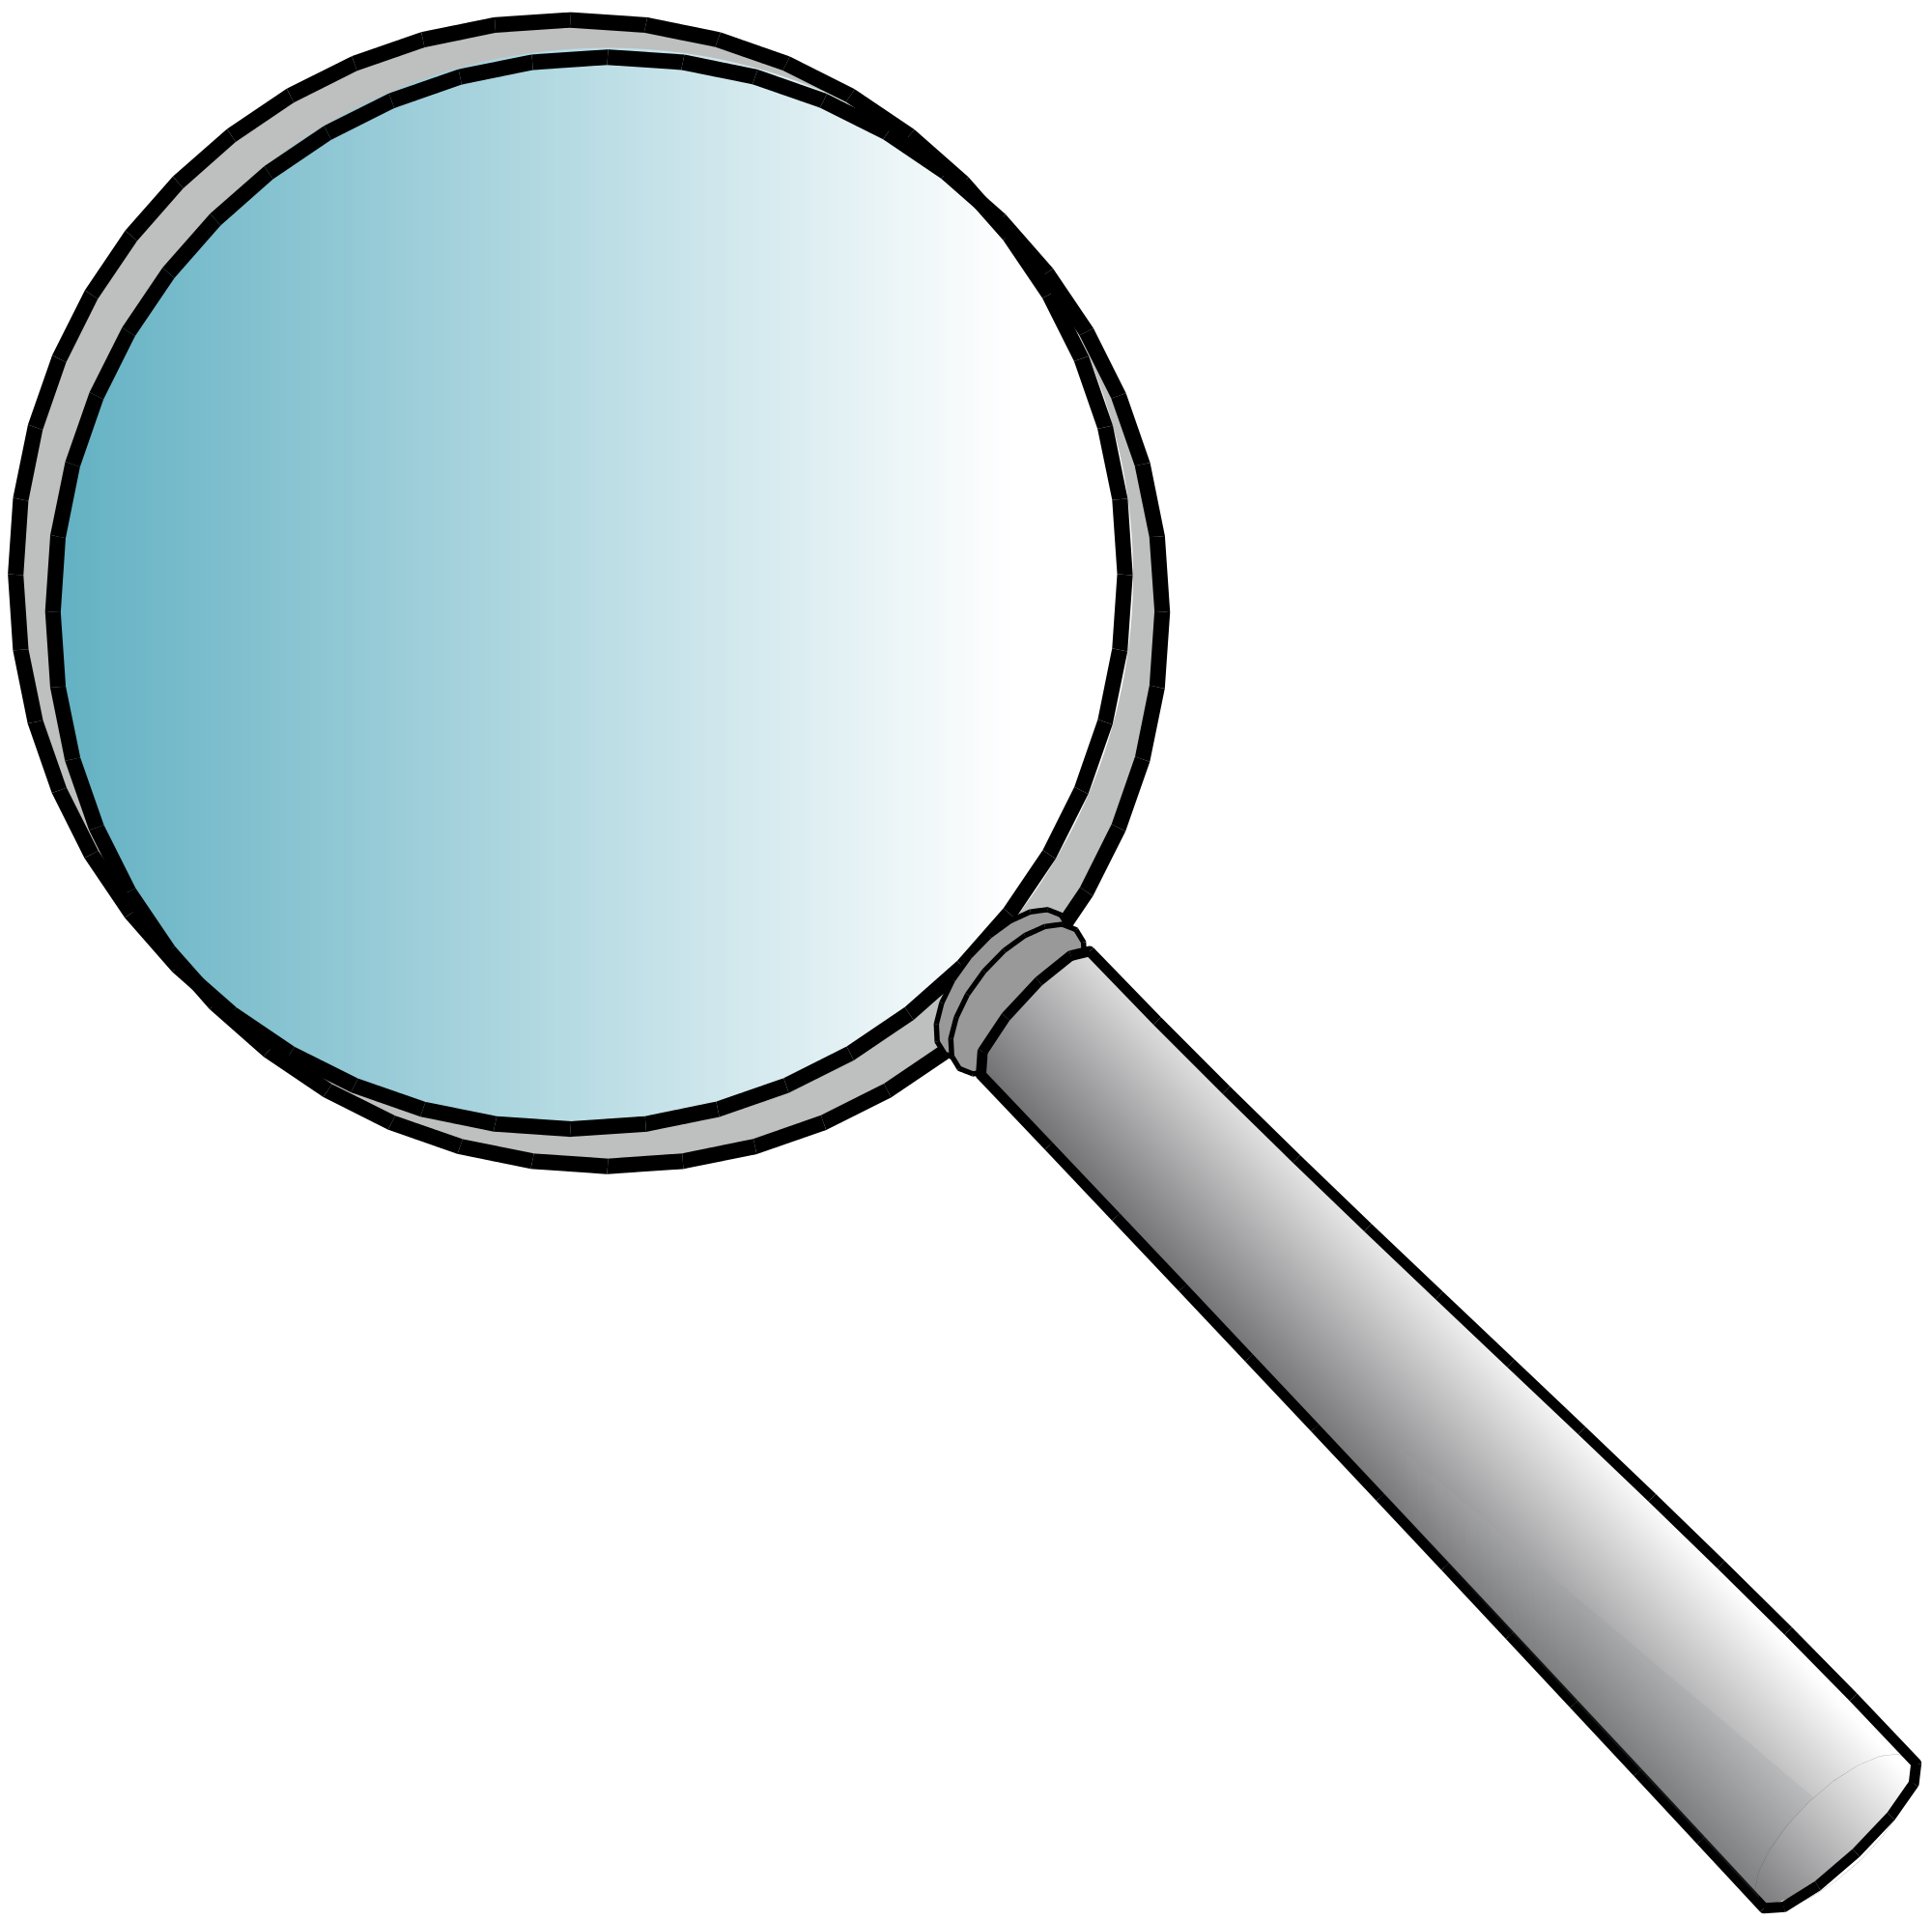 File:Magnifying glass 01.svg - Wikimedia Commons